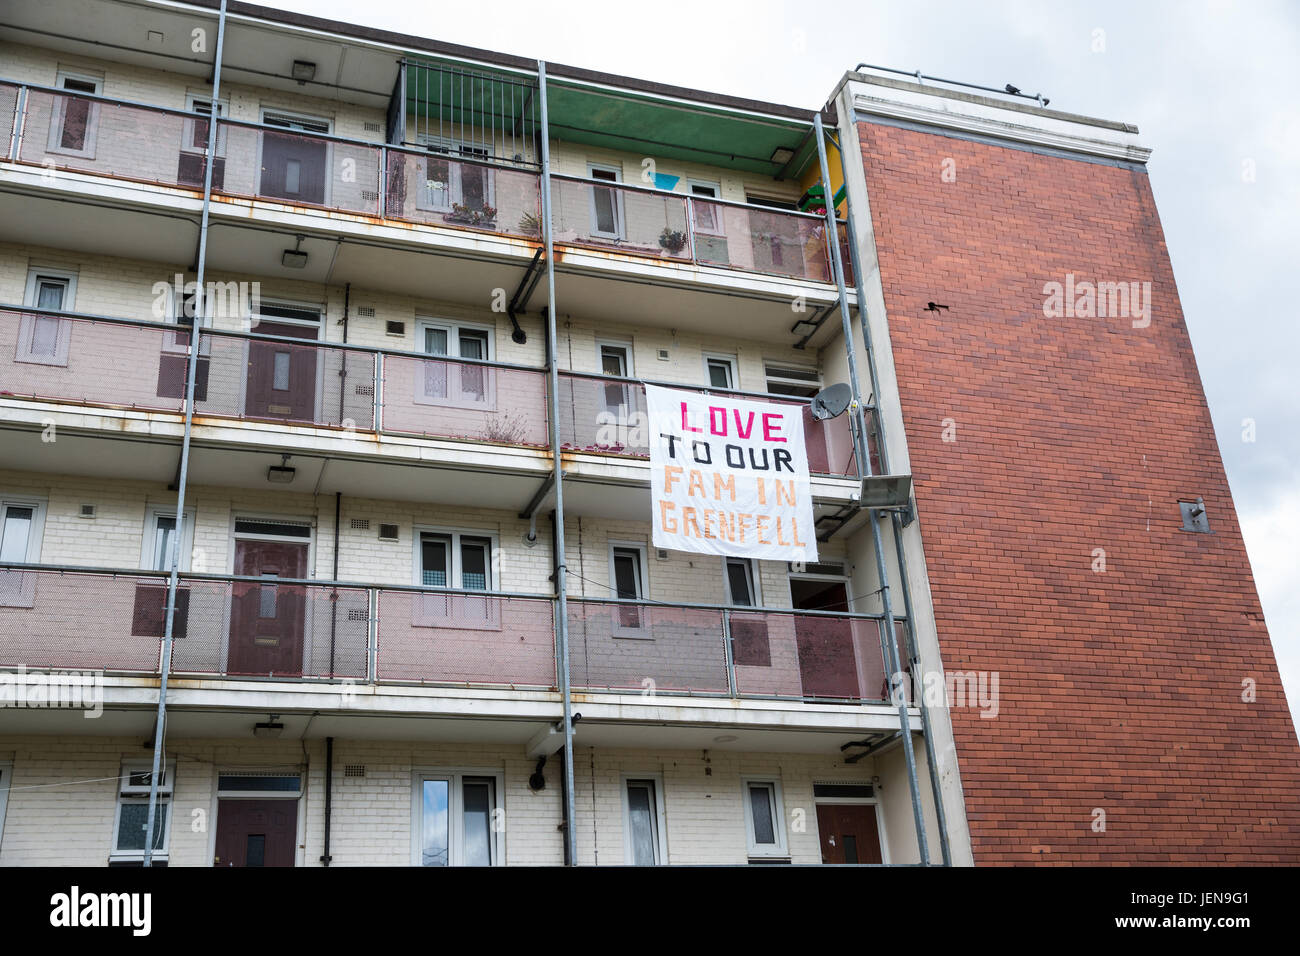 London, UK. 27th June, 2017. Photo taken 25th June, 2017. A banner is displayed at Walford House at Shadwell in East London as part of an 'East 4 West' banner drop at blocks of flats around East London to show solidarity with the residents of Grenfell Tower. Banners displaying messages of solidarity were redropped today at 21 different blocks to represent the 21 floors of the Grenfell Tower occupied by residents before the fire there. Credit: Mark Kerrison/Alamy Live News Stock Photo